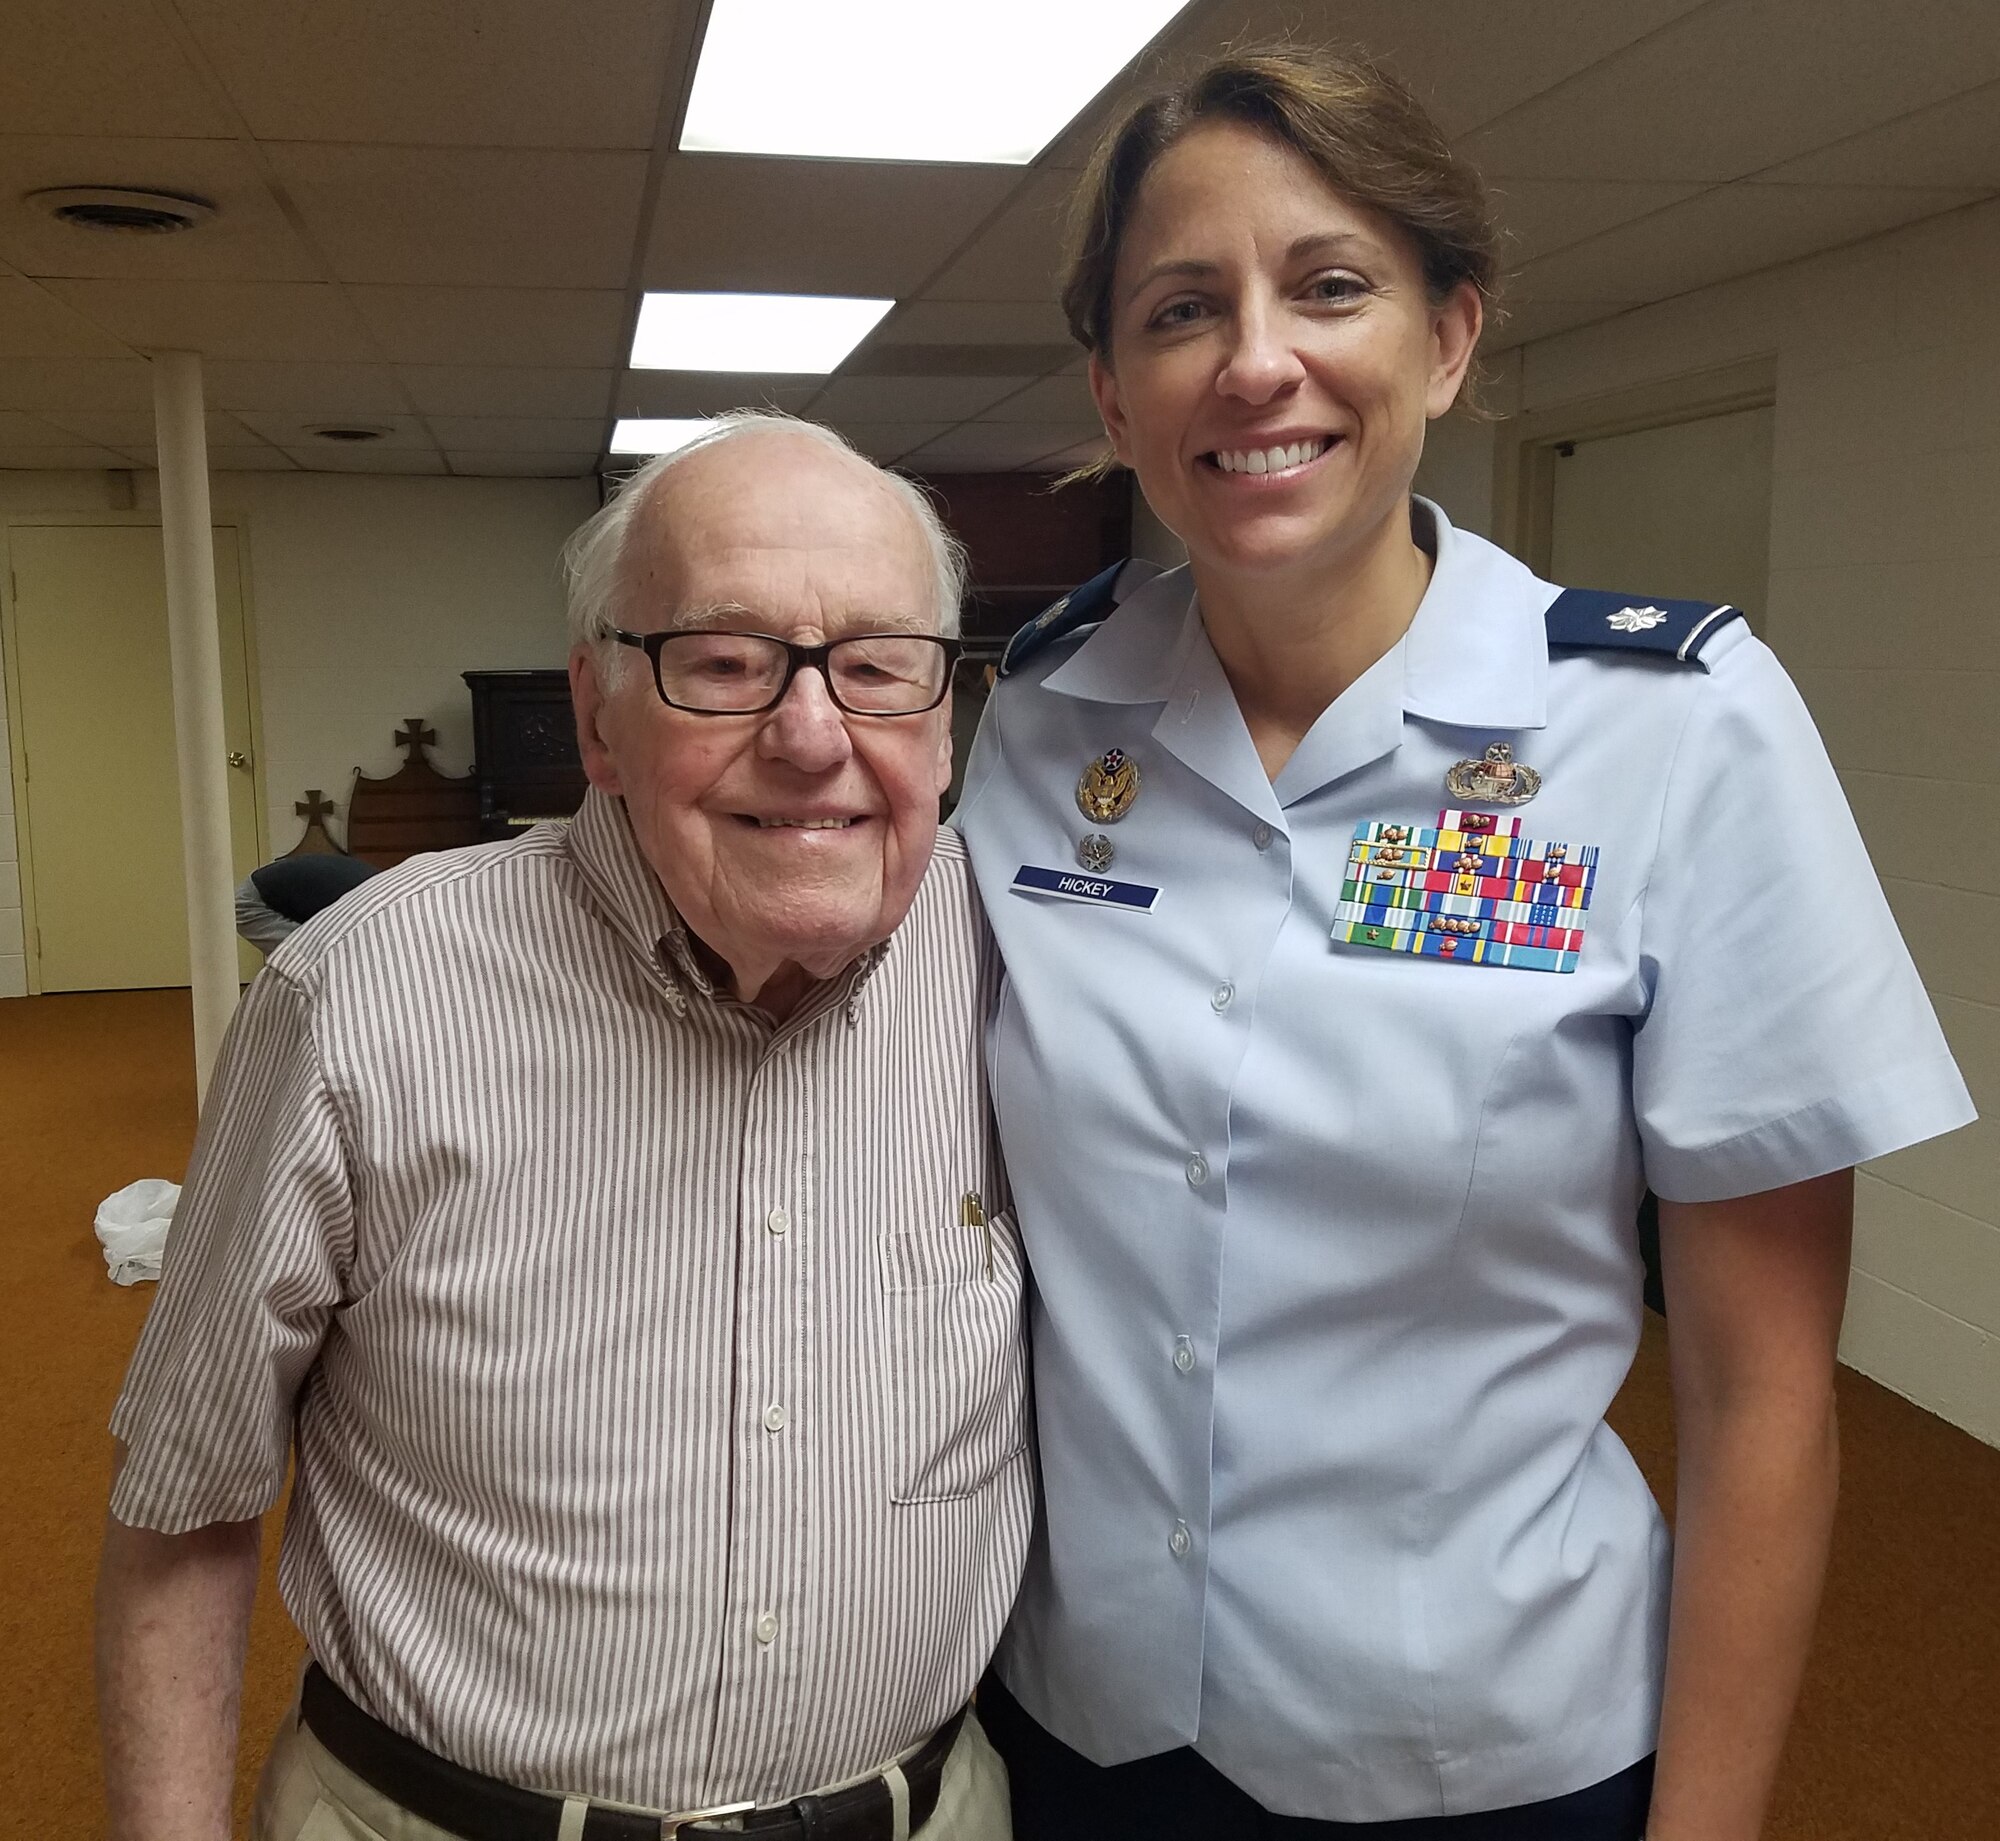 Former 14th Intelligence Squadron commander Lt. Col. (retired) Dianne Hickey, poses with John “Jerry” Johnson during his visit to Wright-Patterson Air Force Base, Ohio in 2016. Johnson passed away Oct. 19, 2021 and had served in Guam during World War II with the Army Air Corps in the 20th Air Force 9th Photographic Technical Squadron. His squadron ultimately became the 14 IS. Hickey and current 14 IS reservists Maj. Andrew Soine and Senior Master Sgt. Jonathon Washington conducted the funeral honors Oct. 23, 2021.